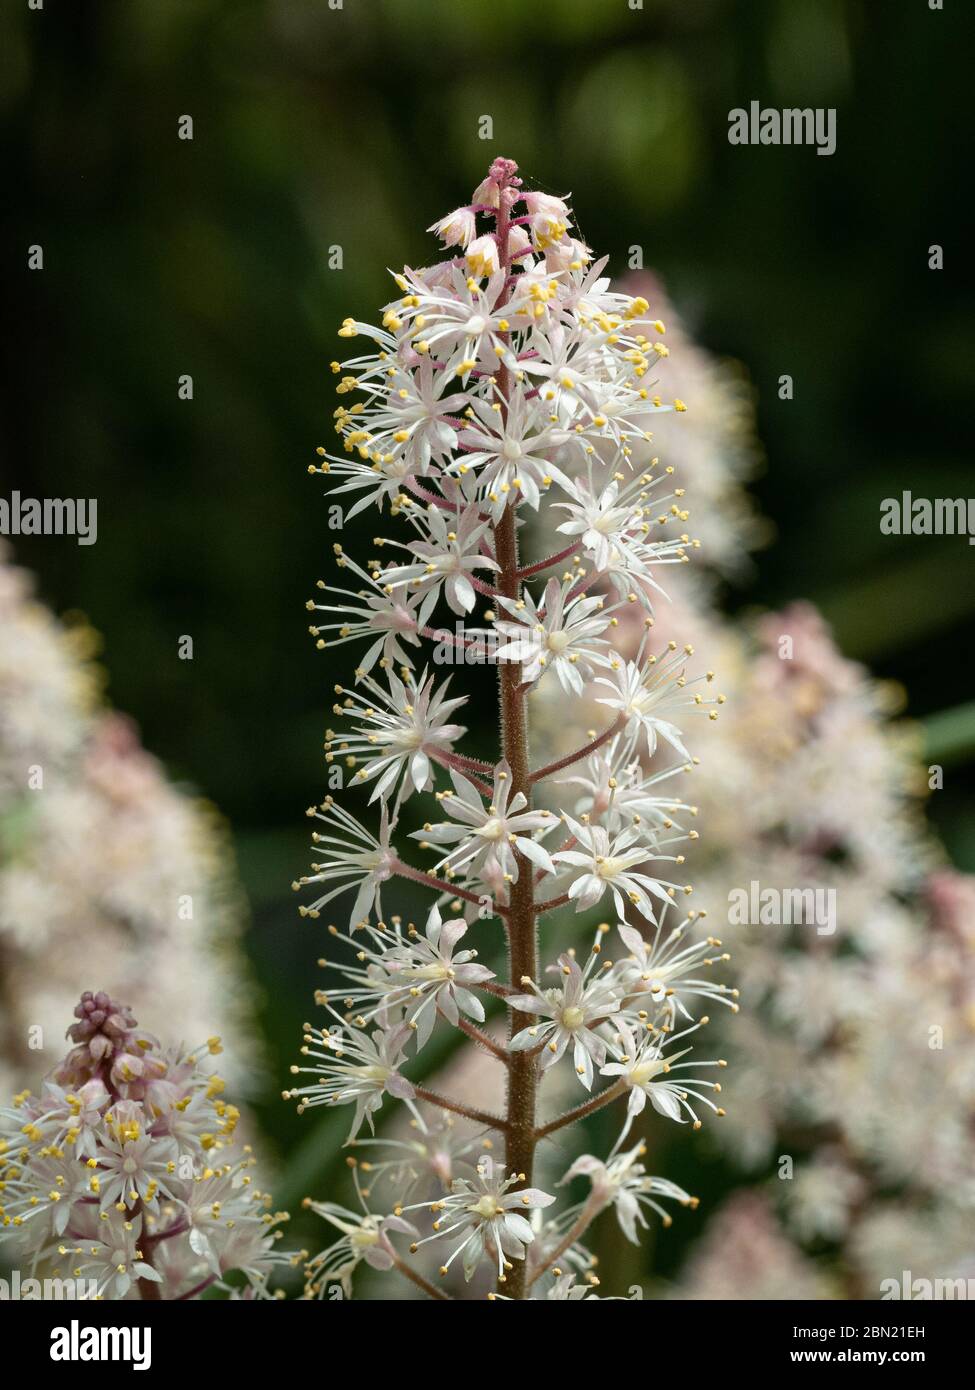 A close up of part of the white flowerhead of Tiarella Ink Spot Stock Photo